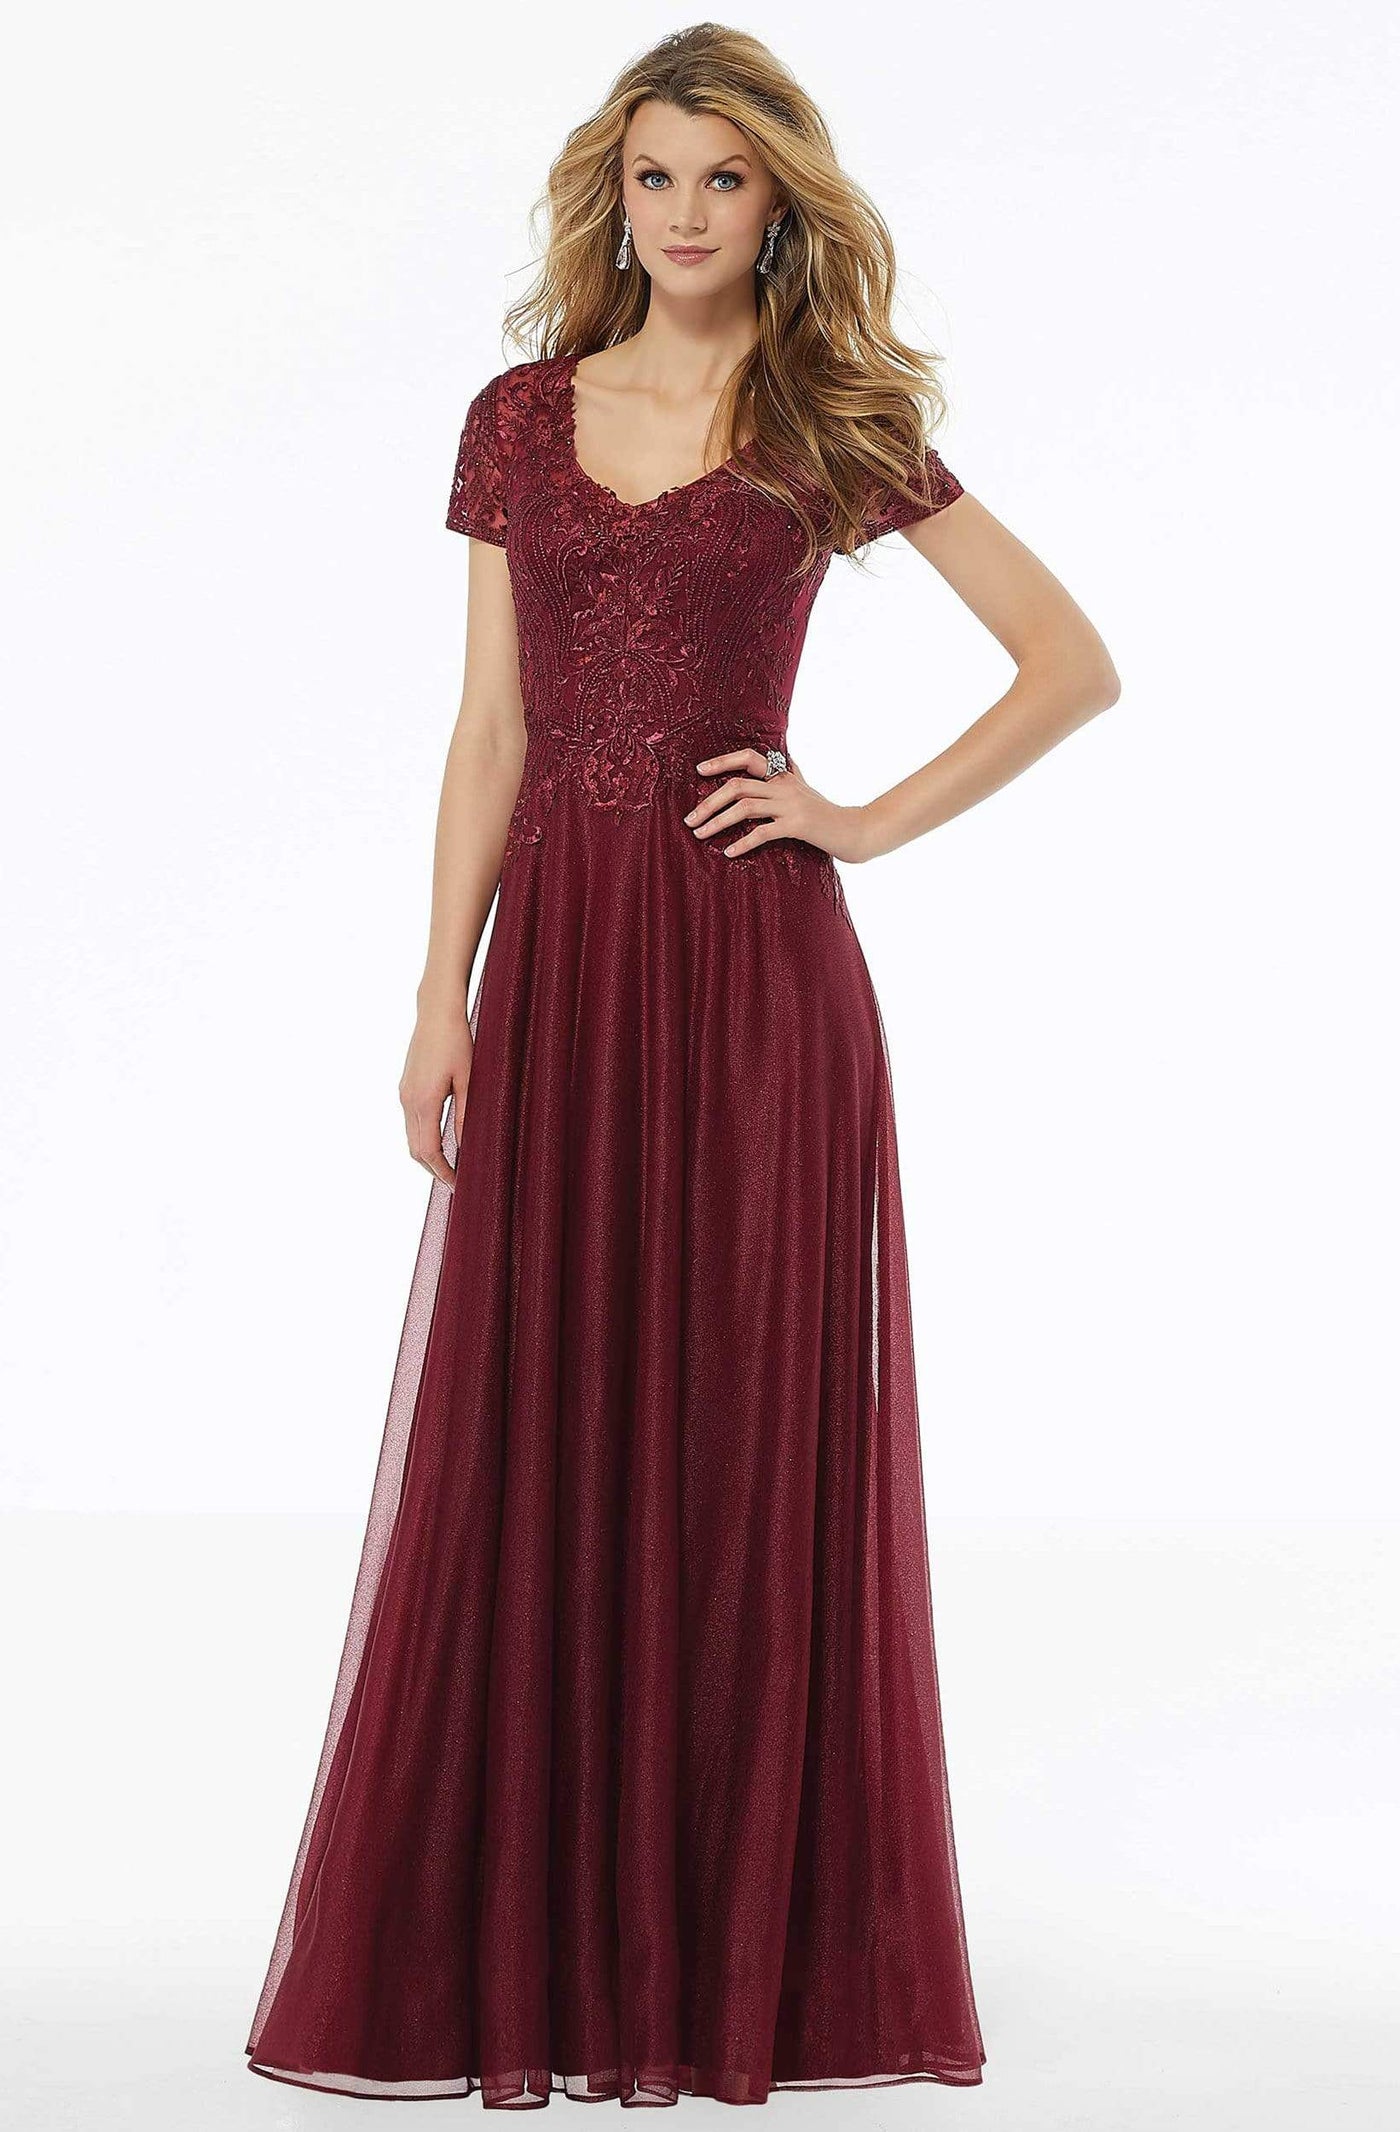 MGNY By Mori Lee - 72116 Bead Embroidered Deep V-neck A-line Dress Mother of the Bride Dresses 2 / Ruby